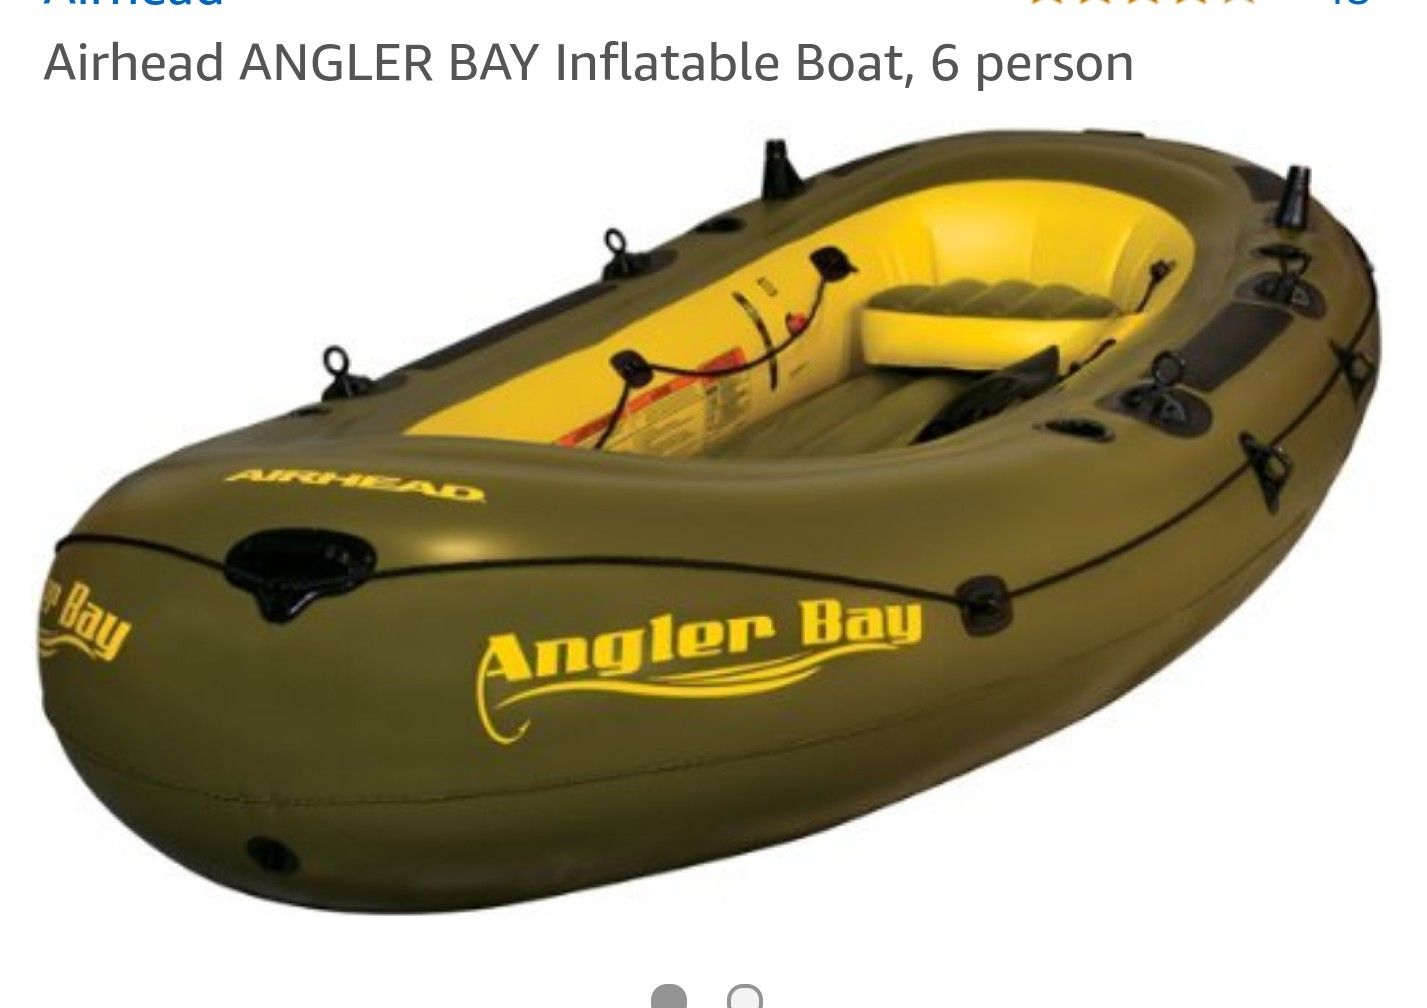 AIRHEAD Angler Bay 6 person inflatable boat